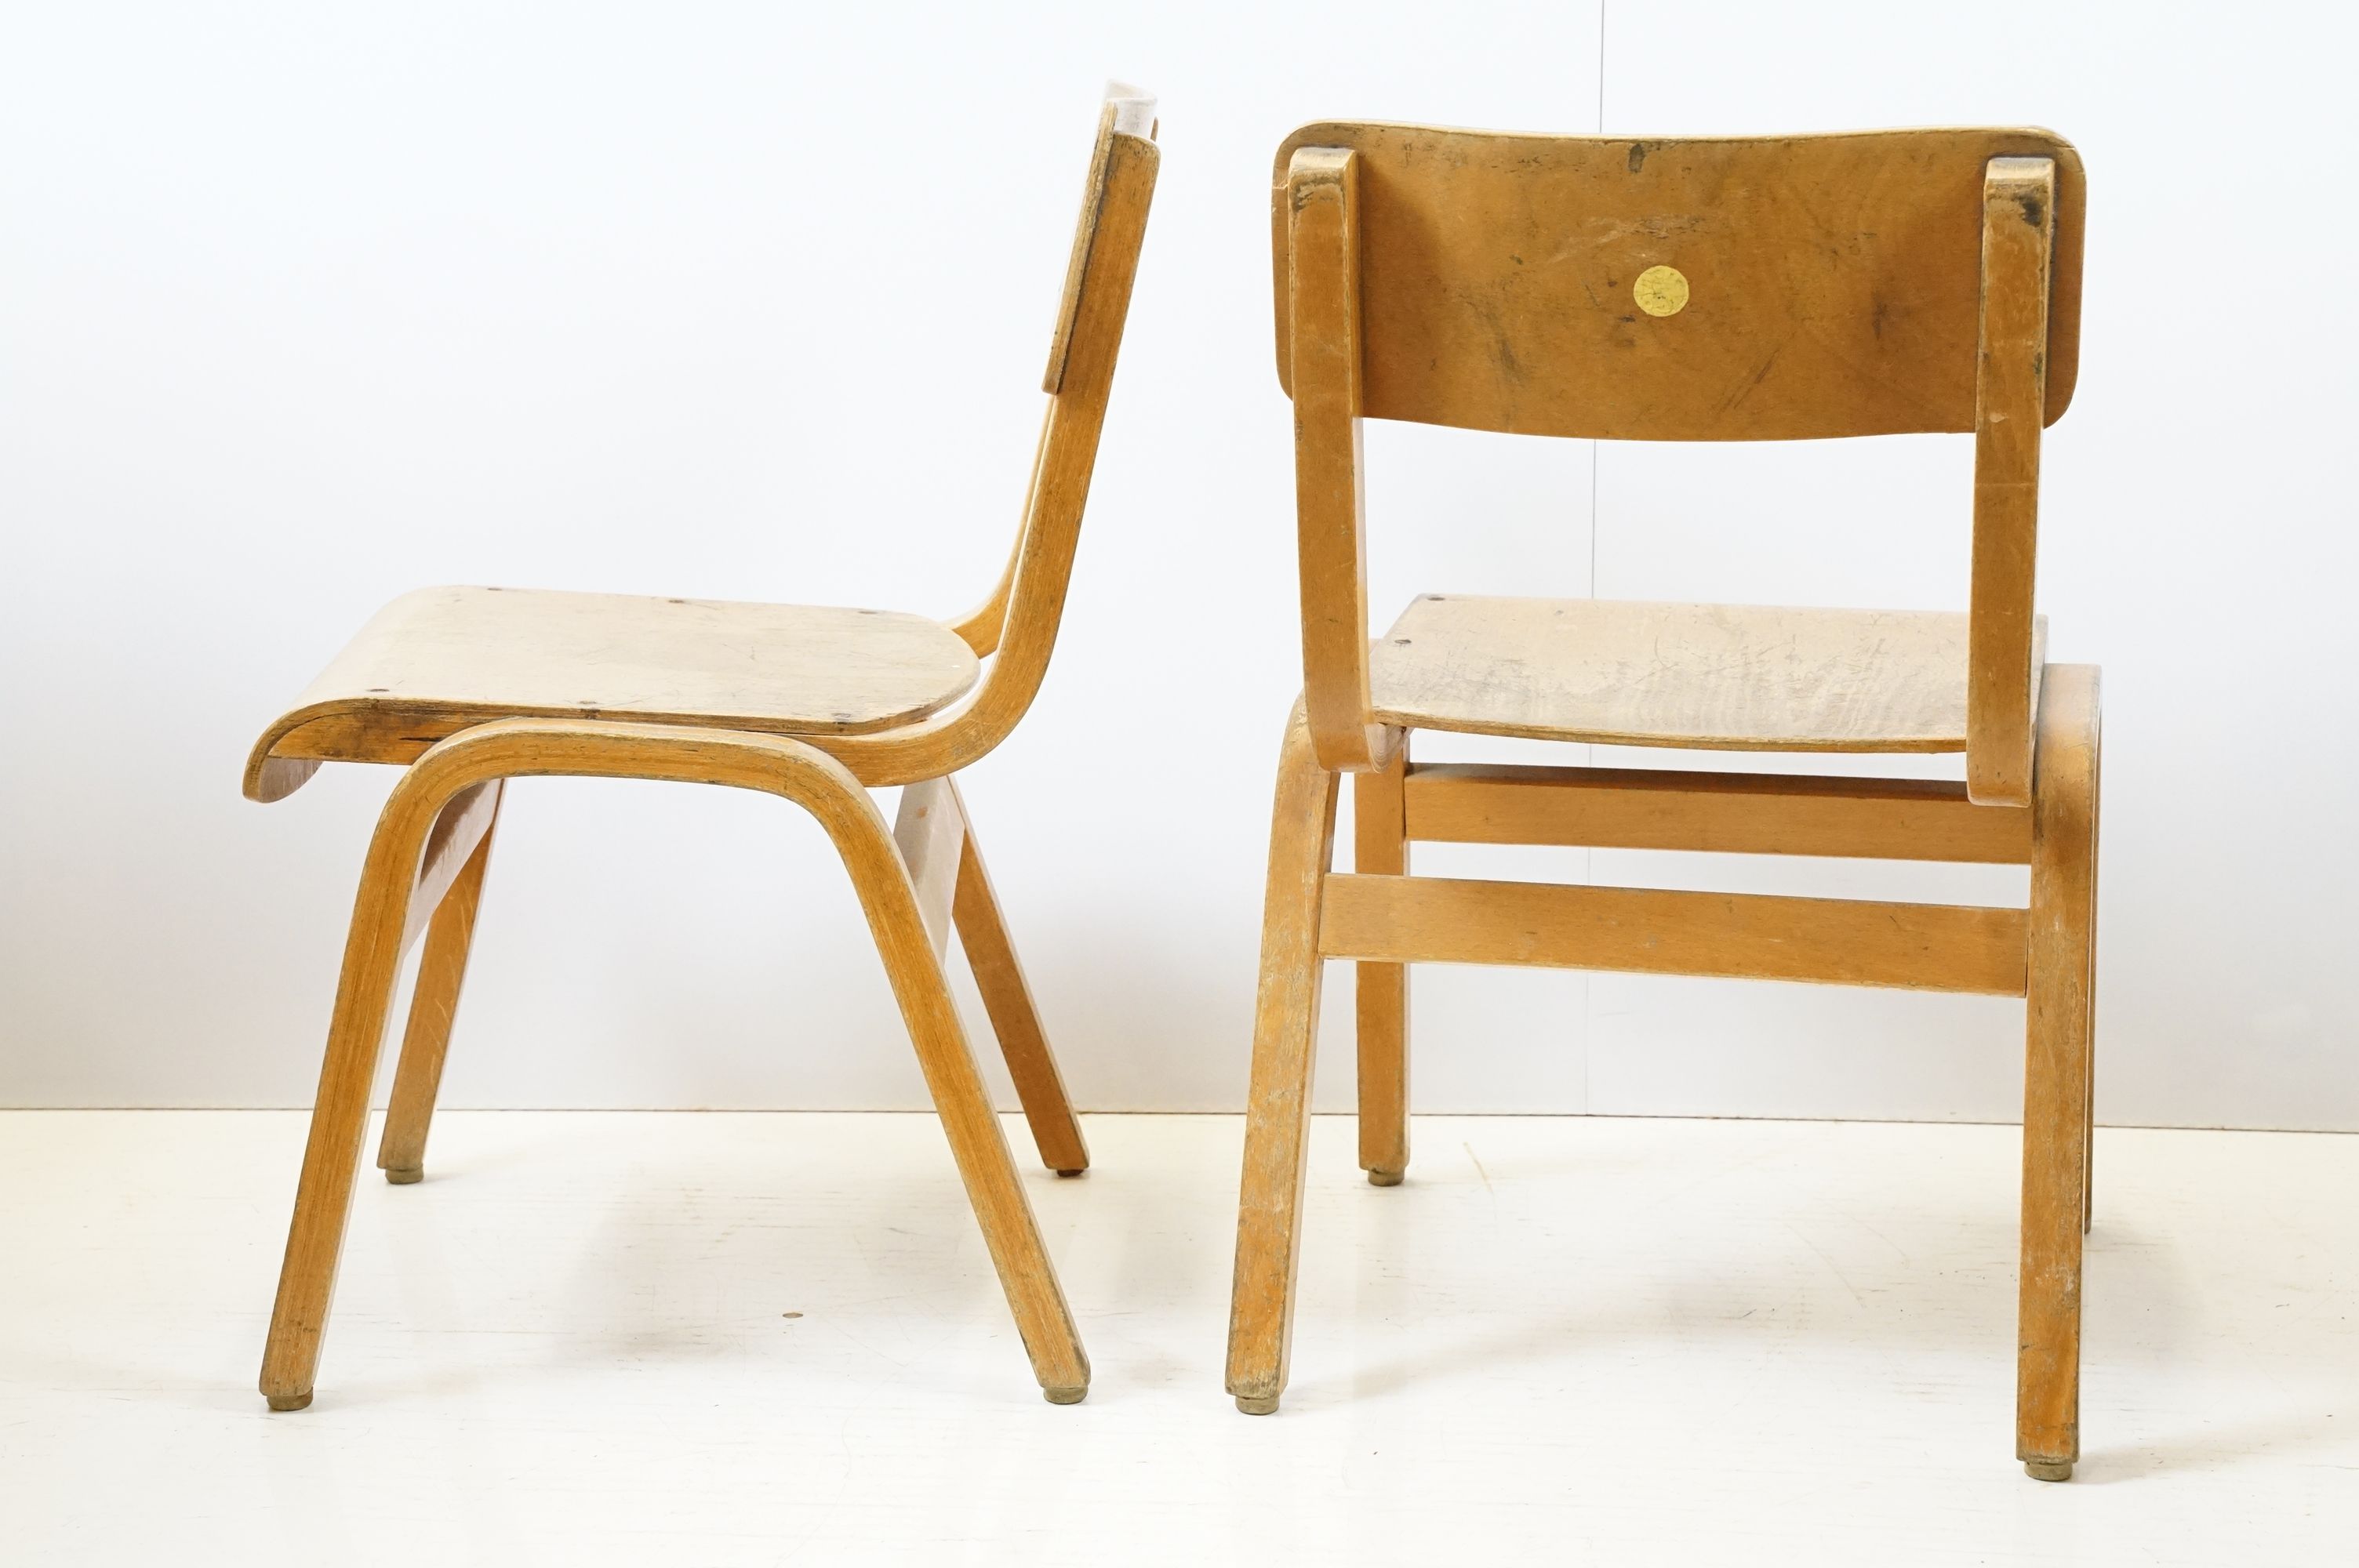 Two mid century school desks and chairs, the desks - 71cm high x 60.5cm wide x 50.5cm deep - Image 14 of 14